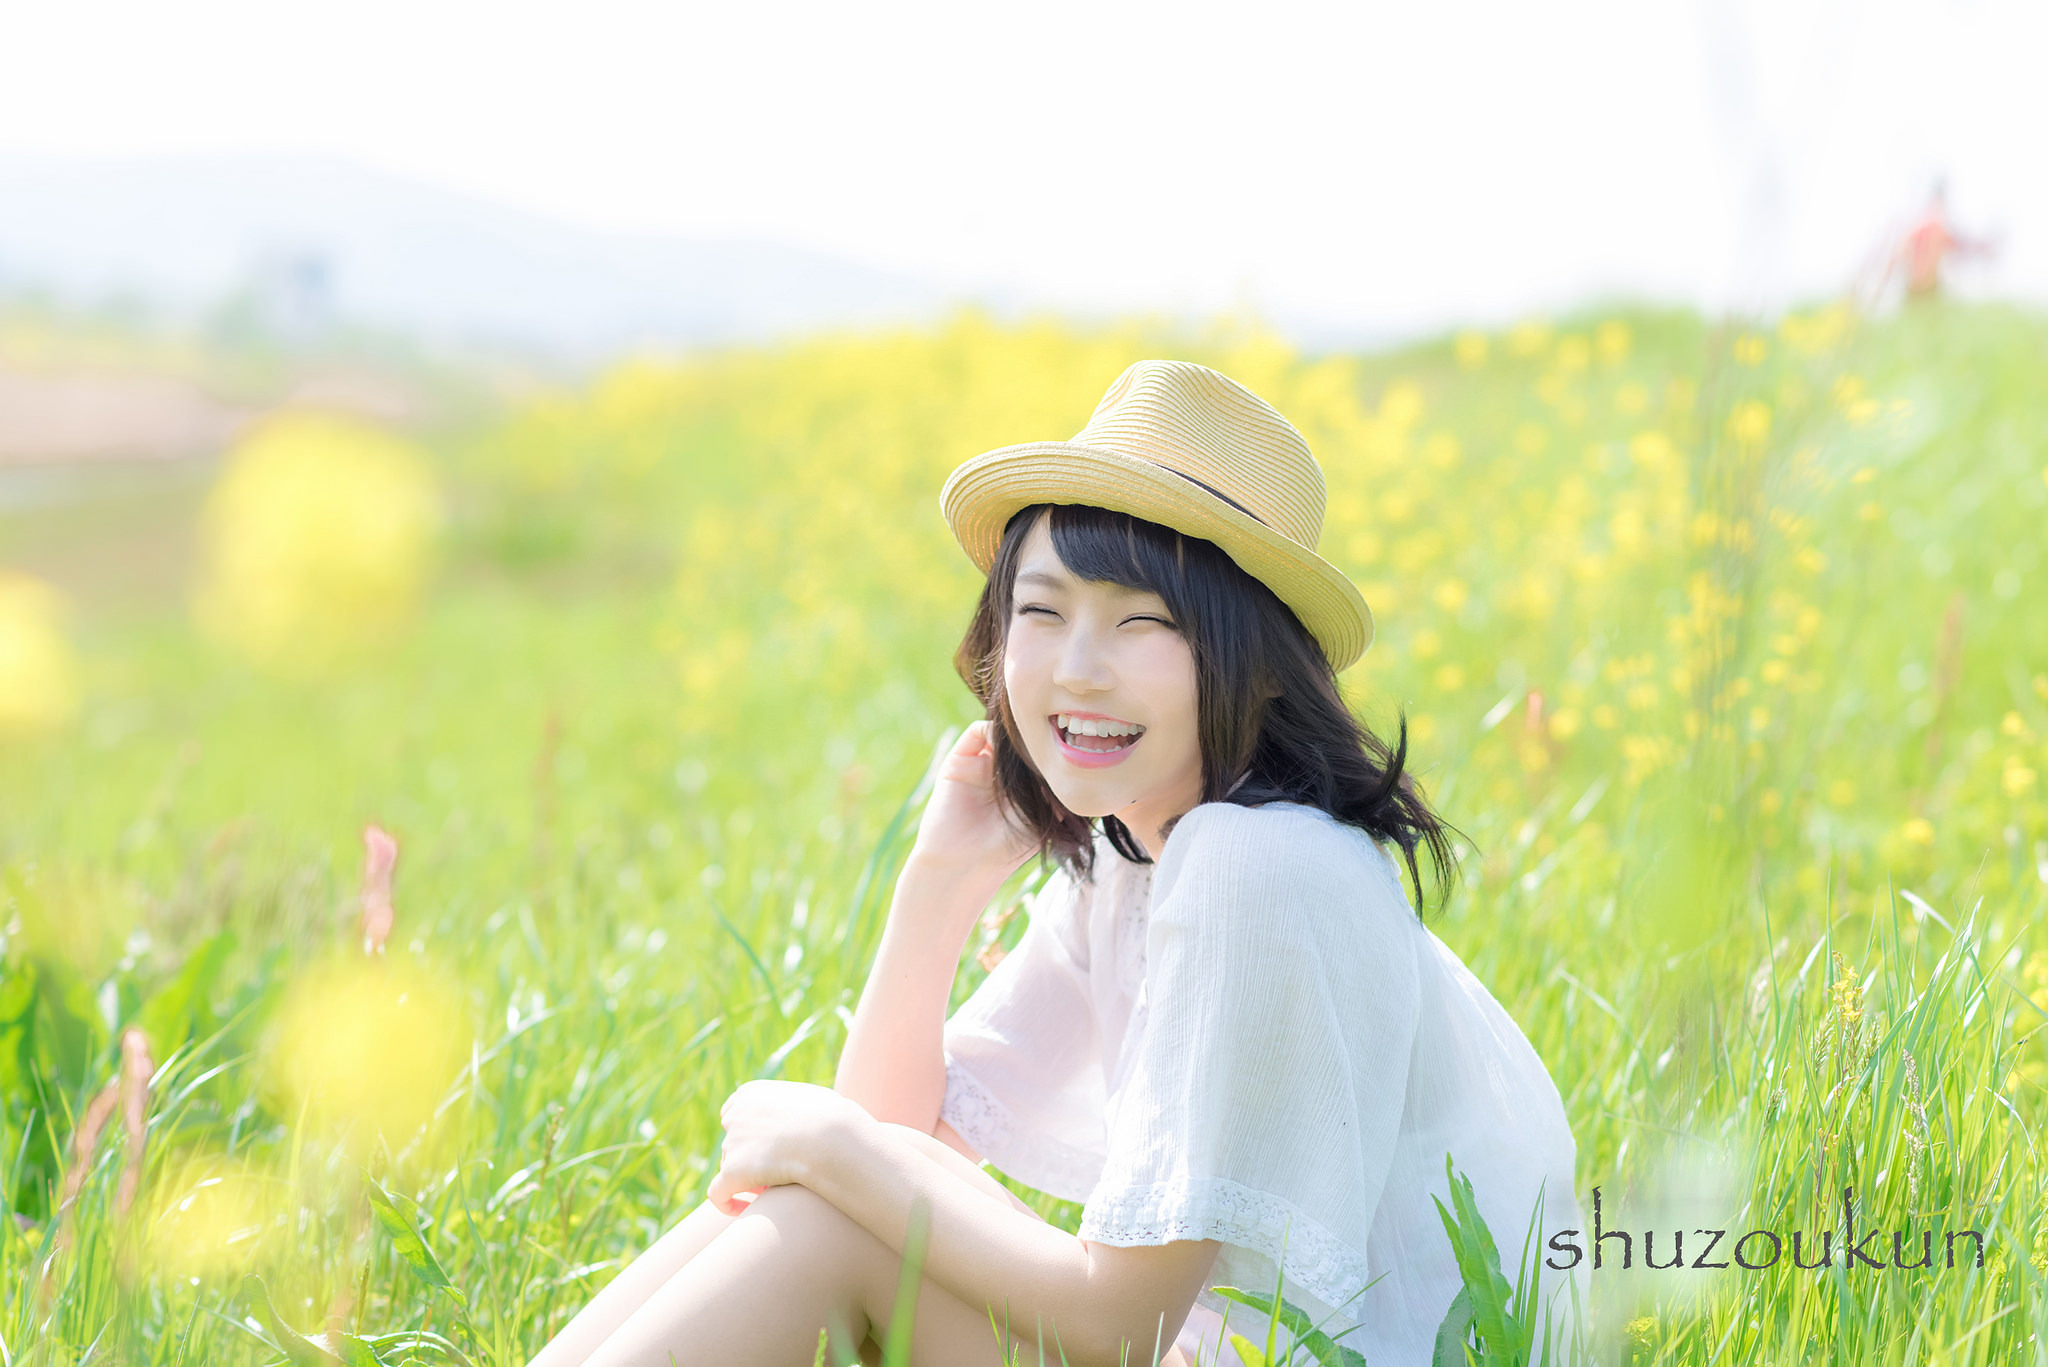 Woman sitting in a field of flowers laughing by shuzoukun